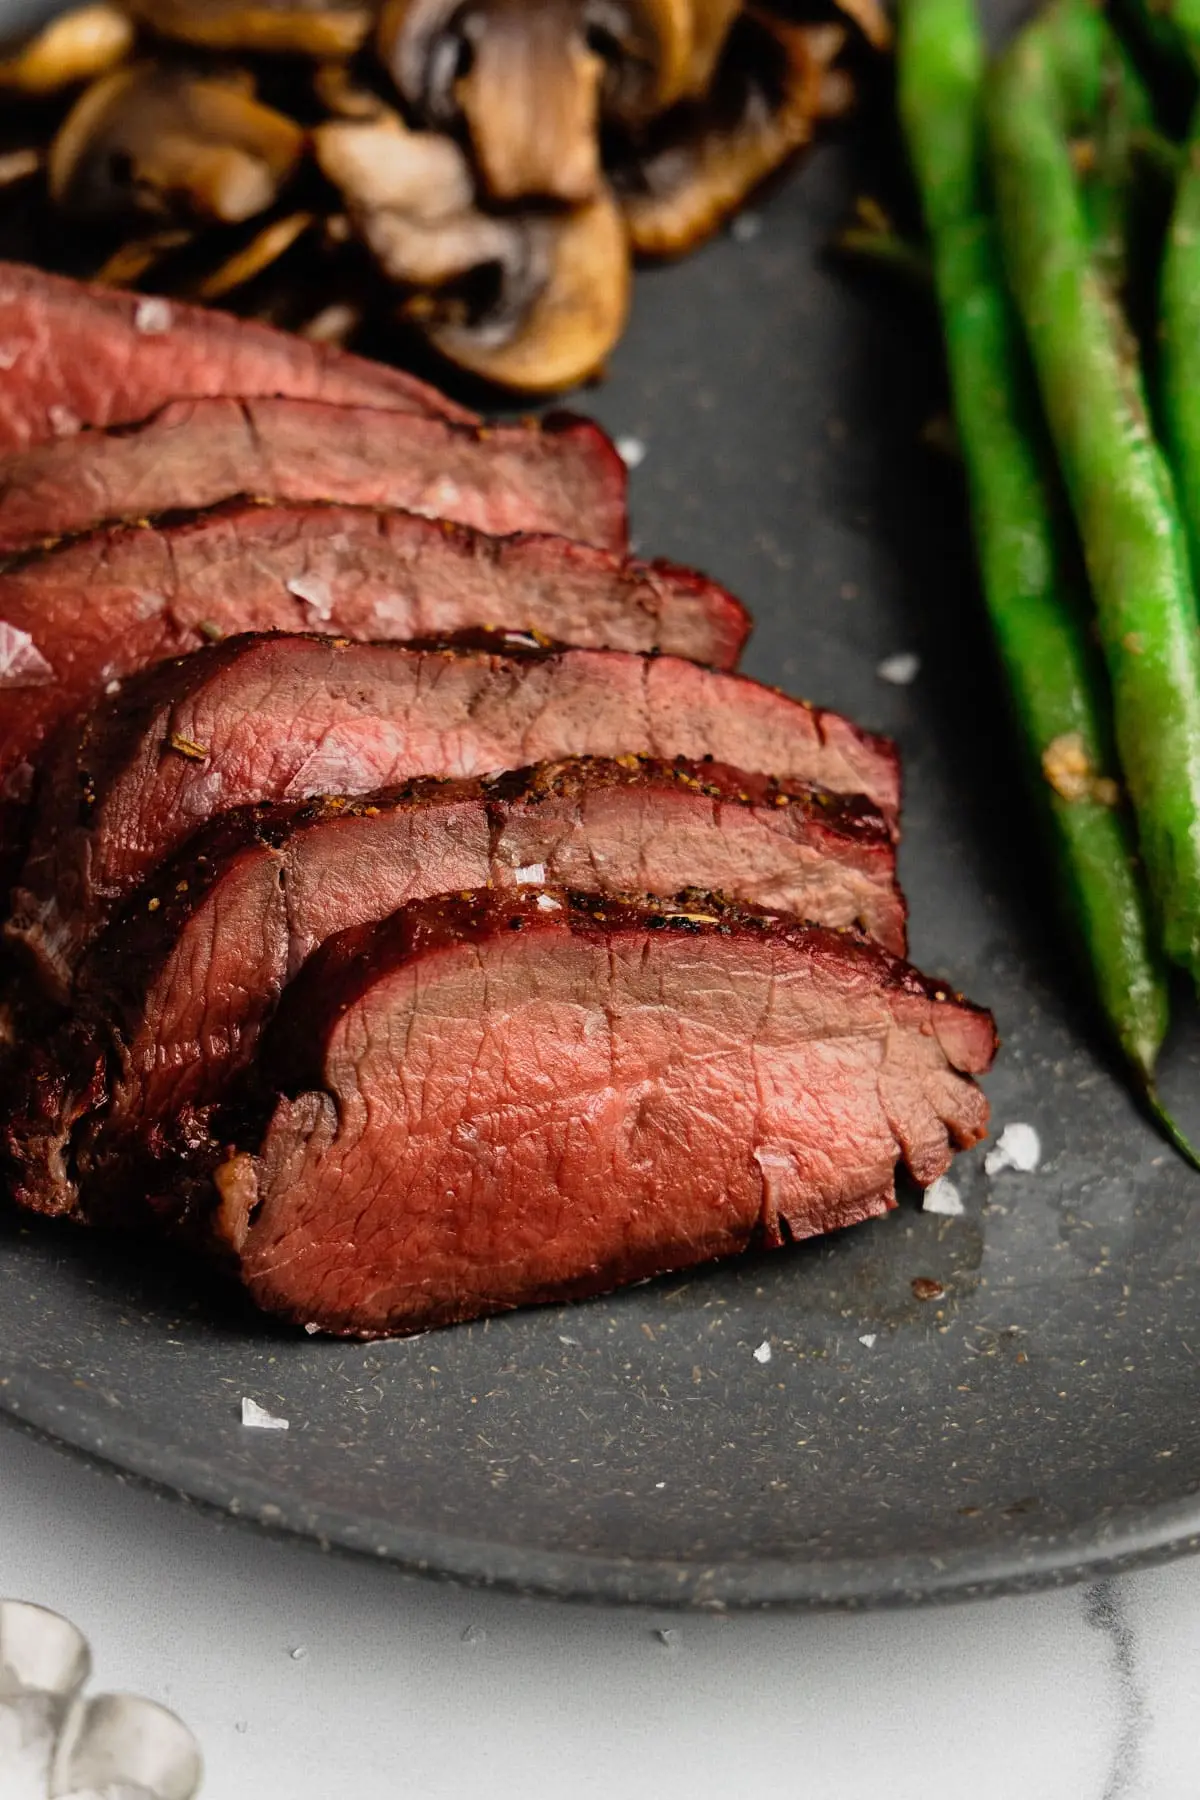 smoked venison loin - What meat is venison loin